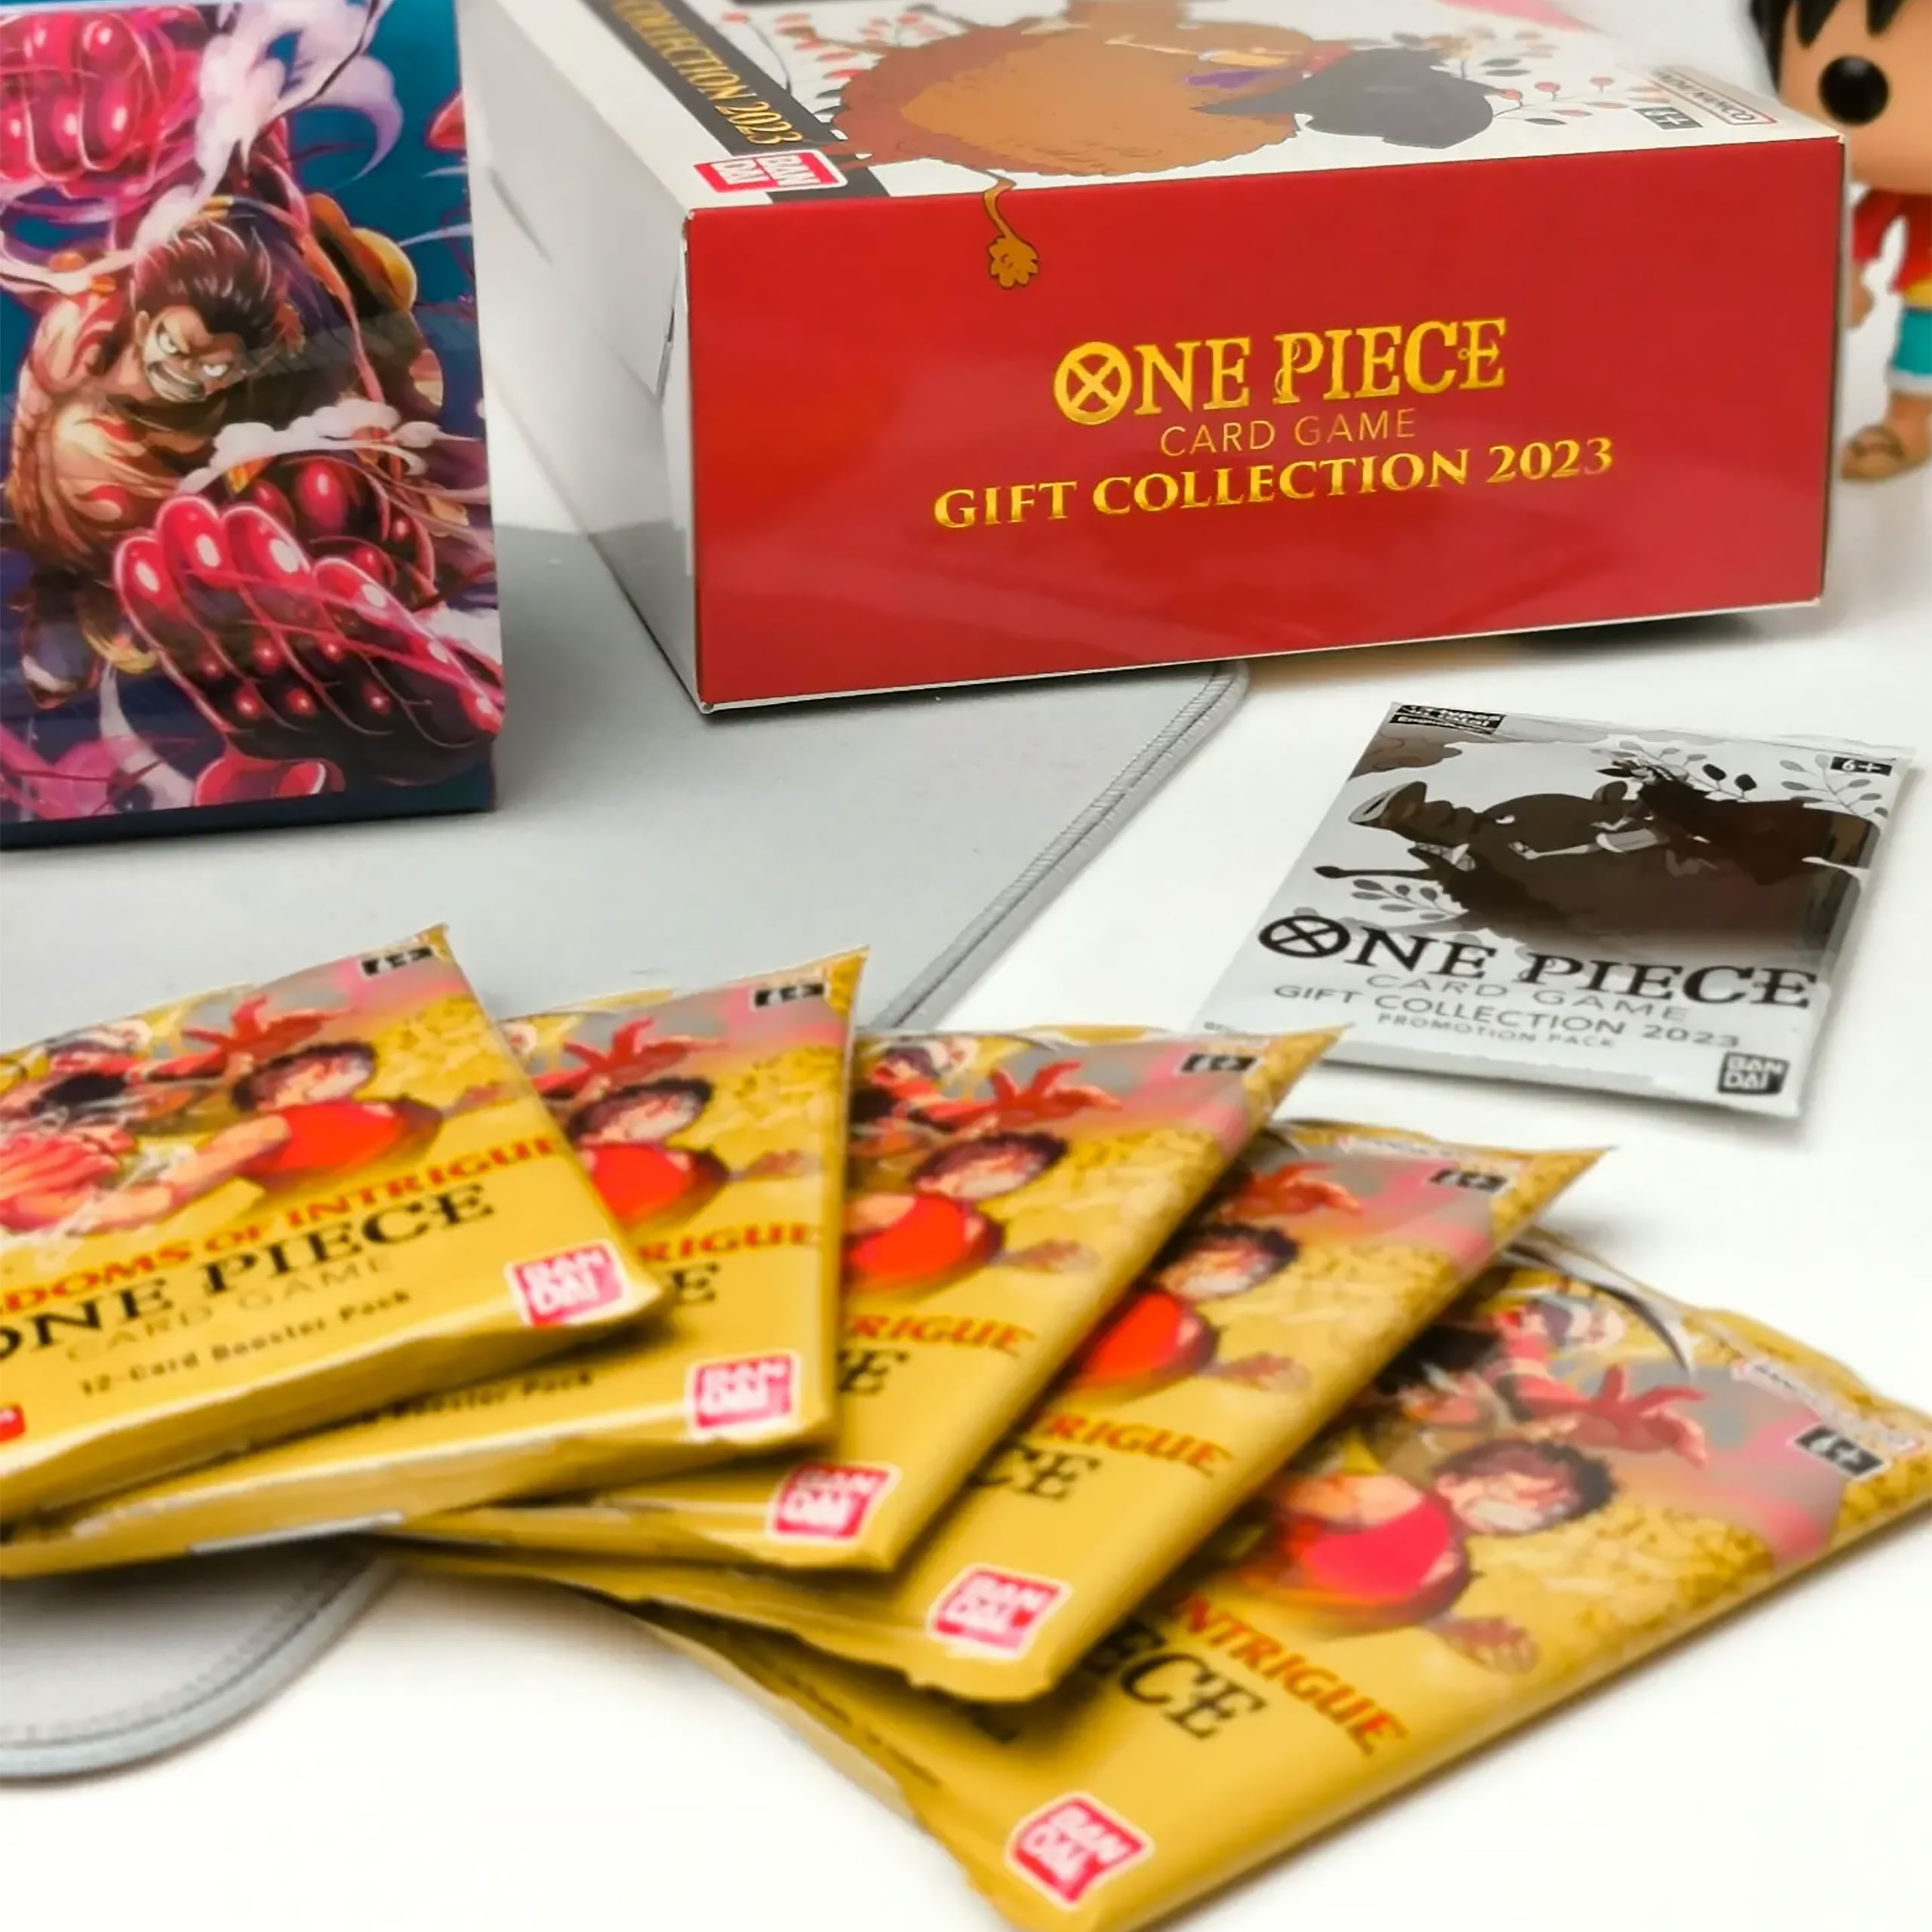 One Piece Card Game - Gift Collection 2023 englische Version